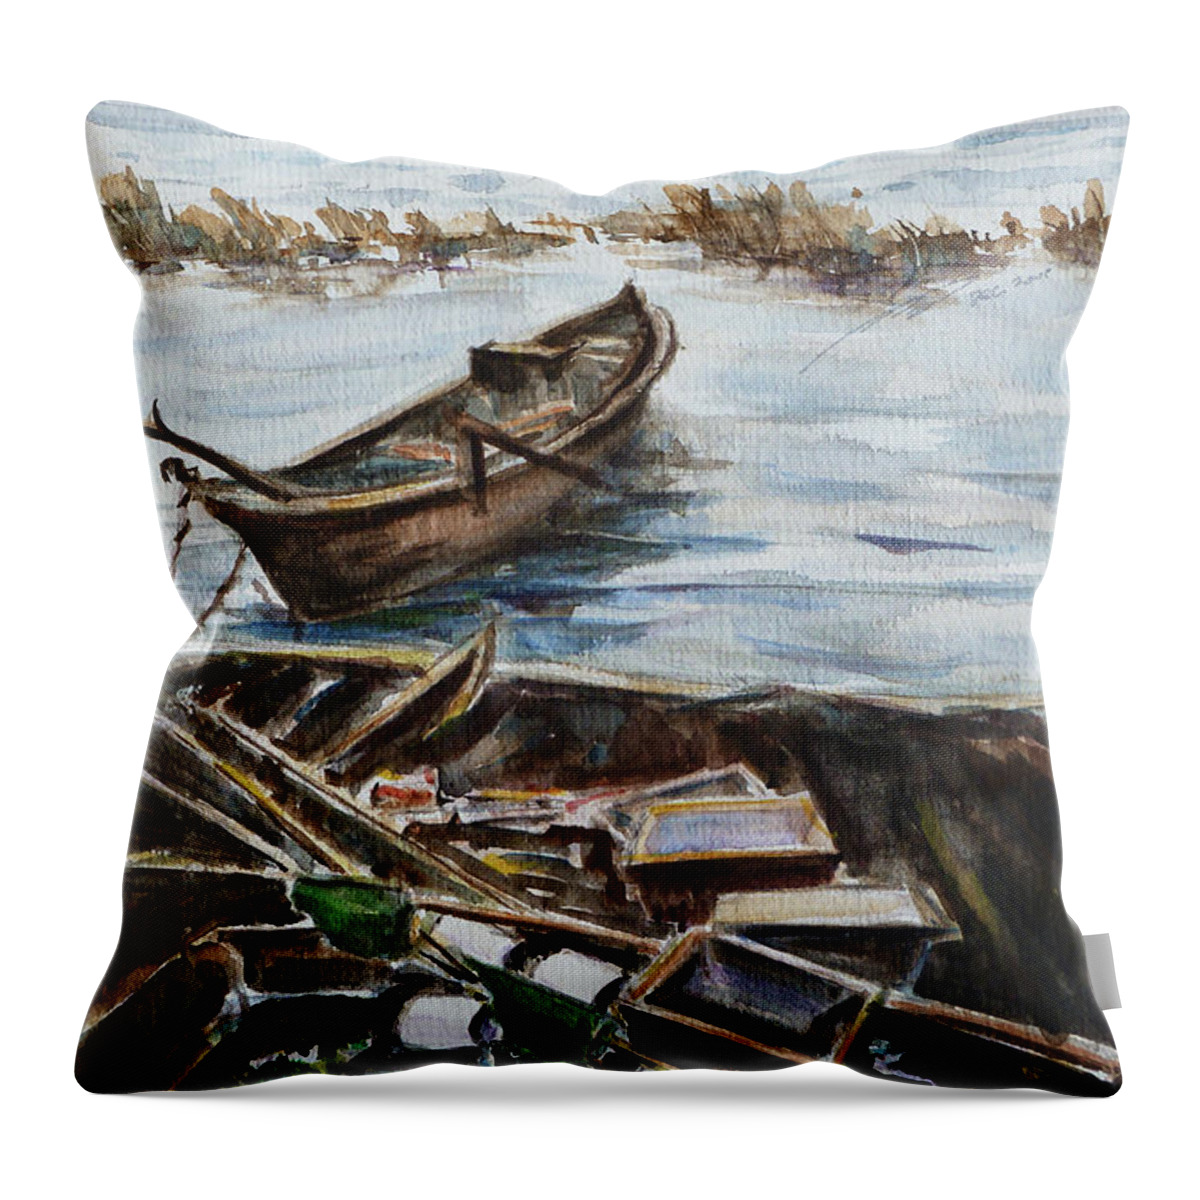 Boat Throw Pillow featuring the painting New England Wharf by Xueling Zou